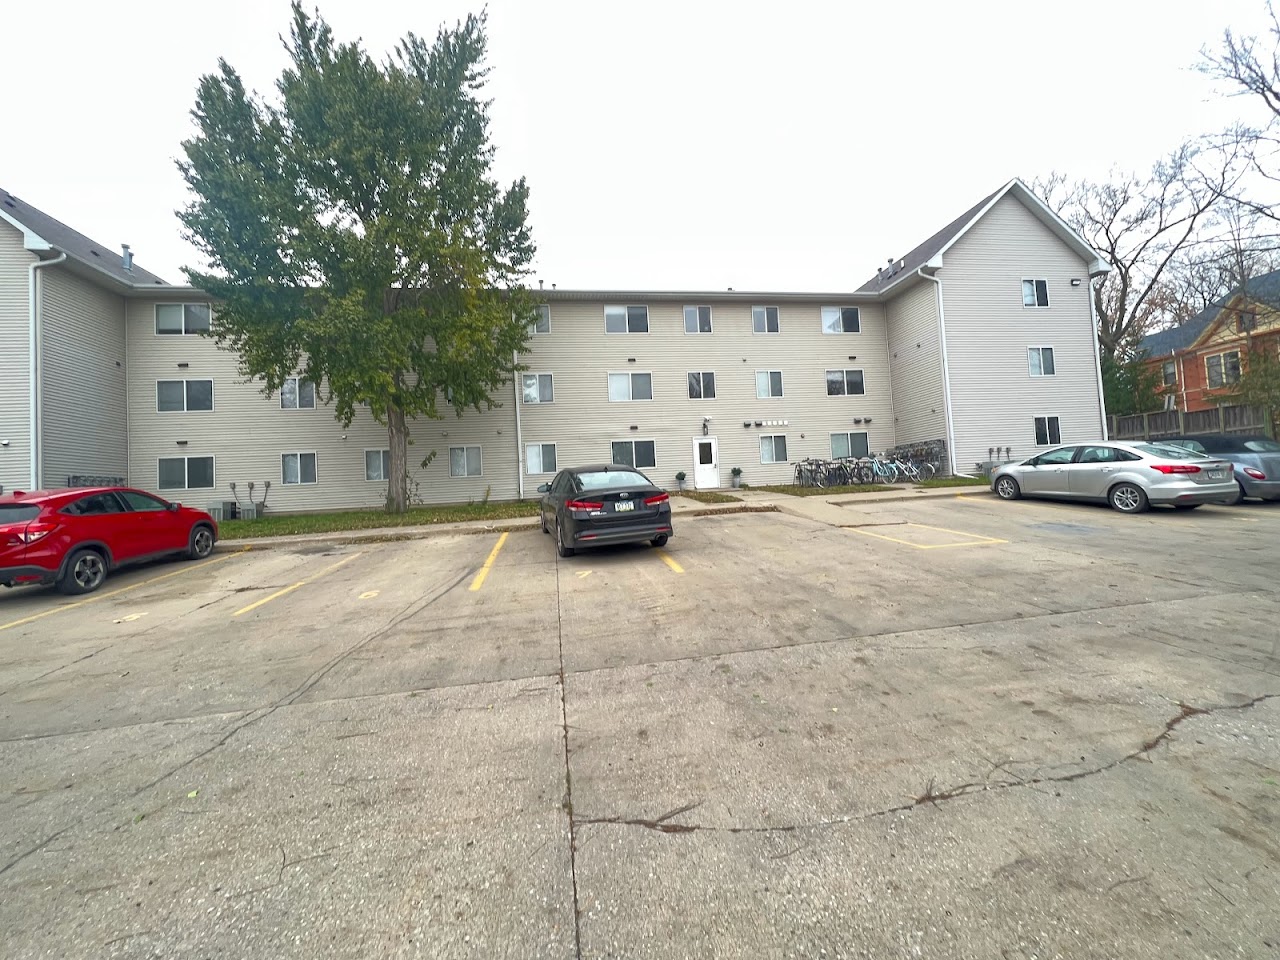 Photo of CORRIDOR WOODS. Affordable housing located at 720 FOSTER RD IOWA CITY, IA 52245